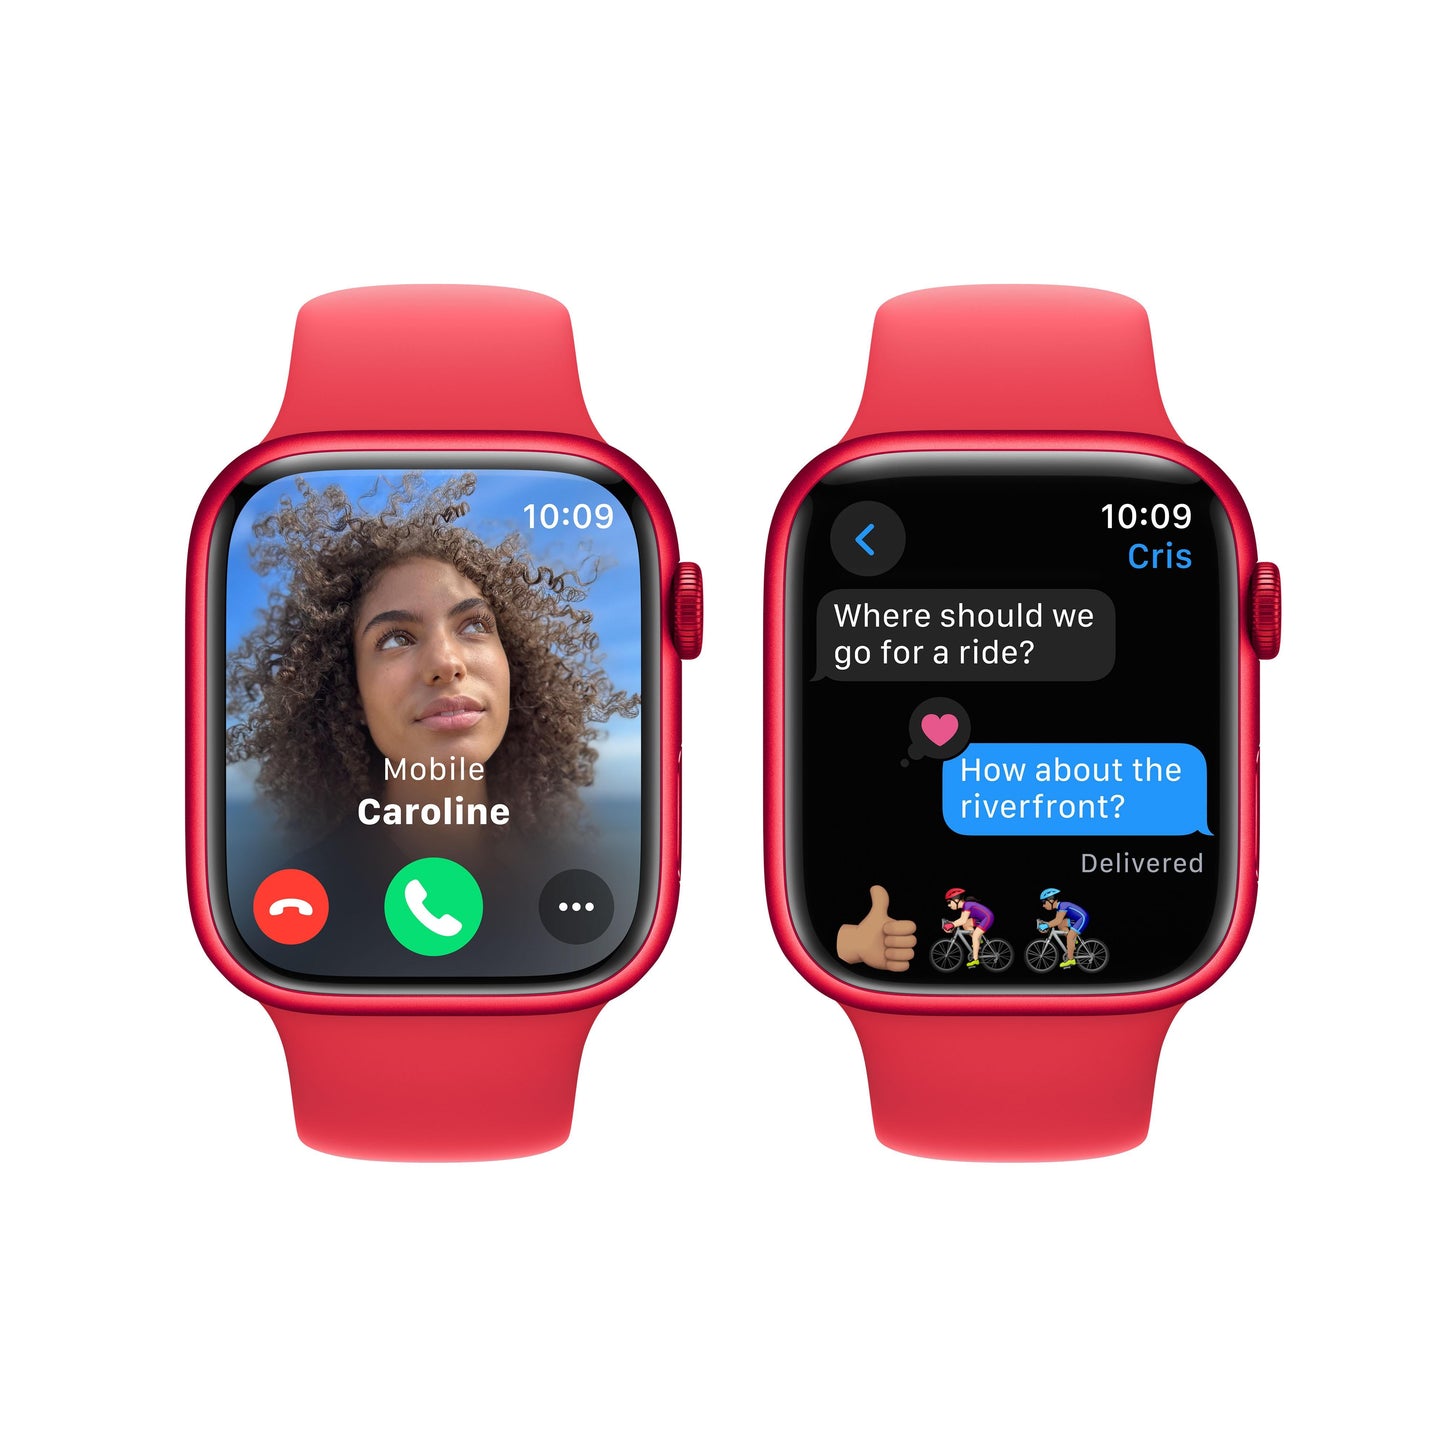 Apple Watch Series 9 GPS 45mm (PRODUCT)RED Alum Case w/ (PRODUCT)RED Sport Band - S/M